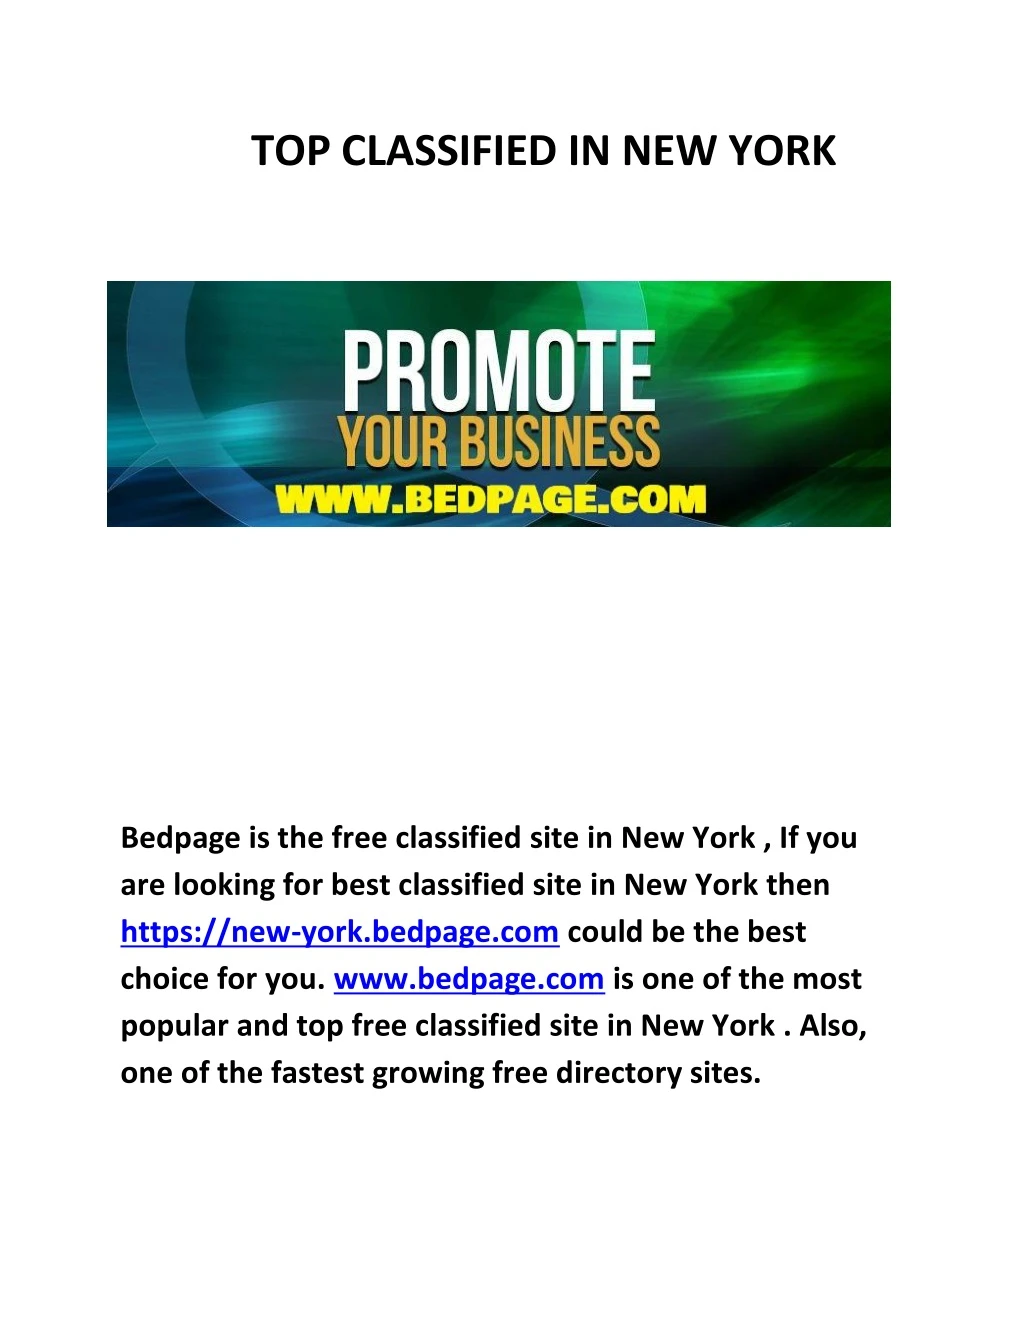 top classified in new york